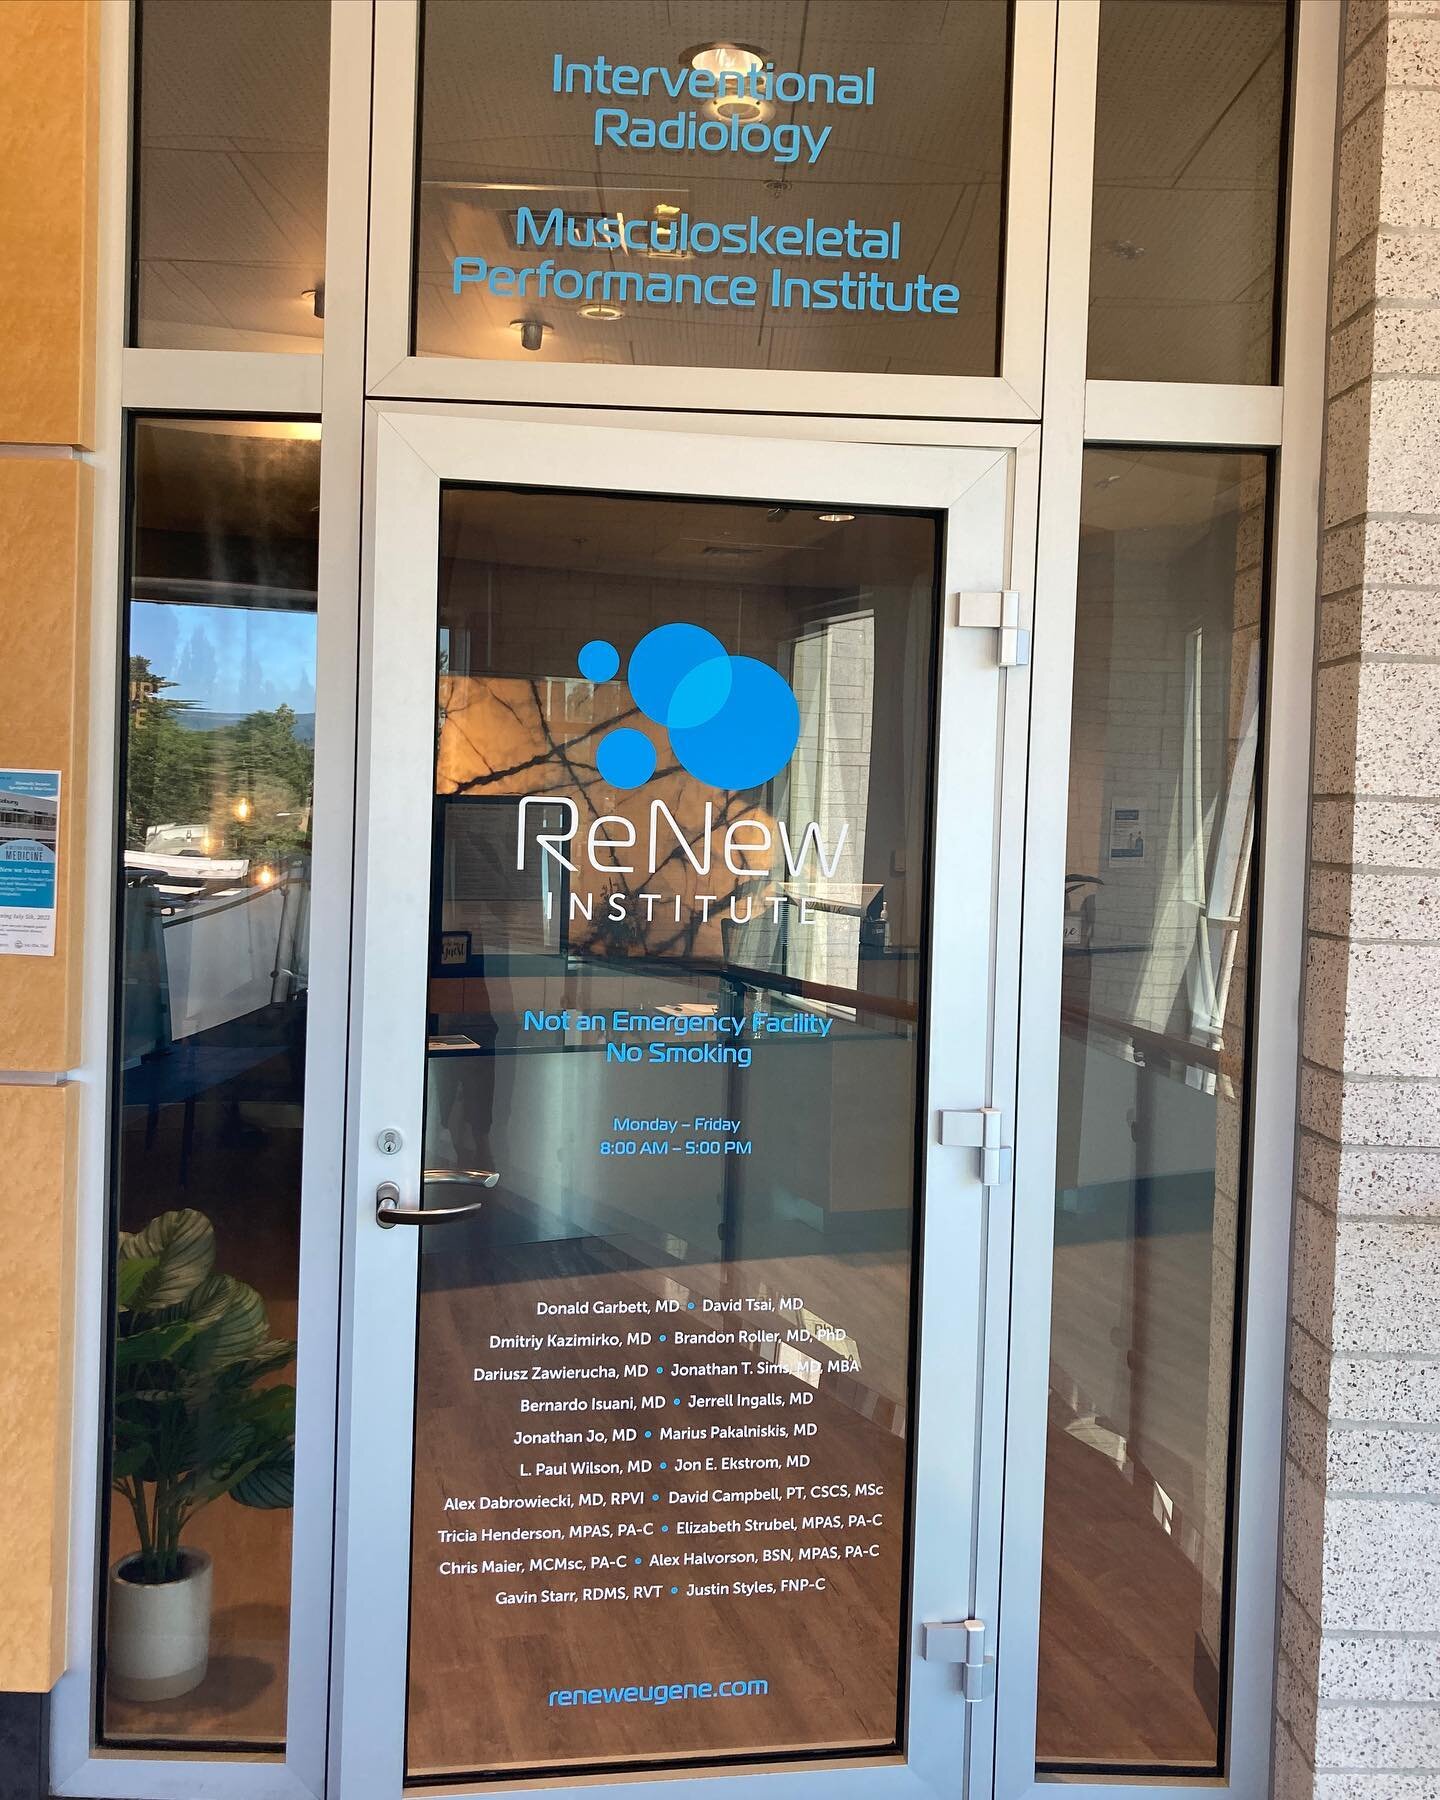 Welcome to the ReNew Performance Institute, TTPRs new home

We&rsquo;re open and ready for business, have a quick look at the new TTPR space that will greet you for your Premium PT needs 

Here for Oregon 2022? Drop in or DM to find out more, we help